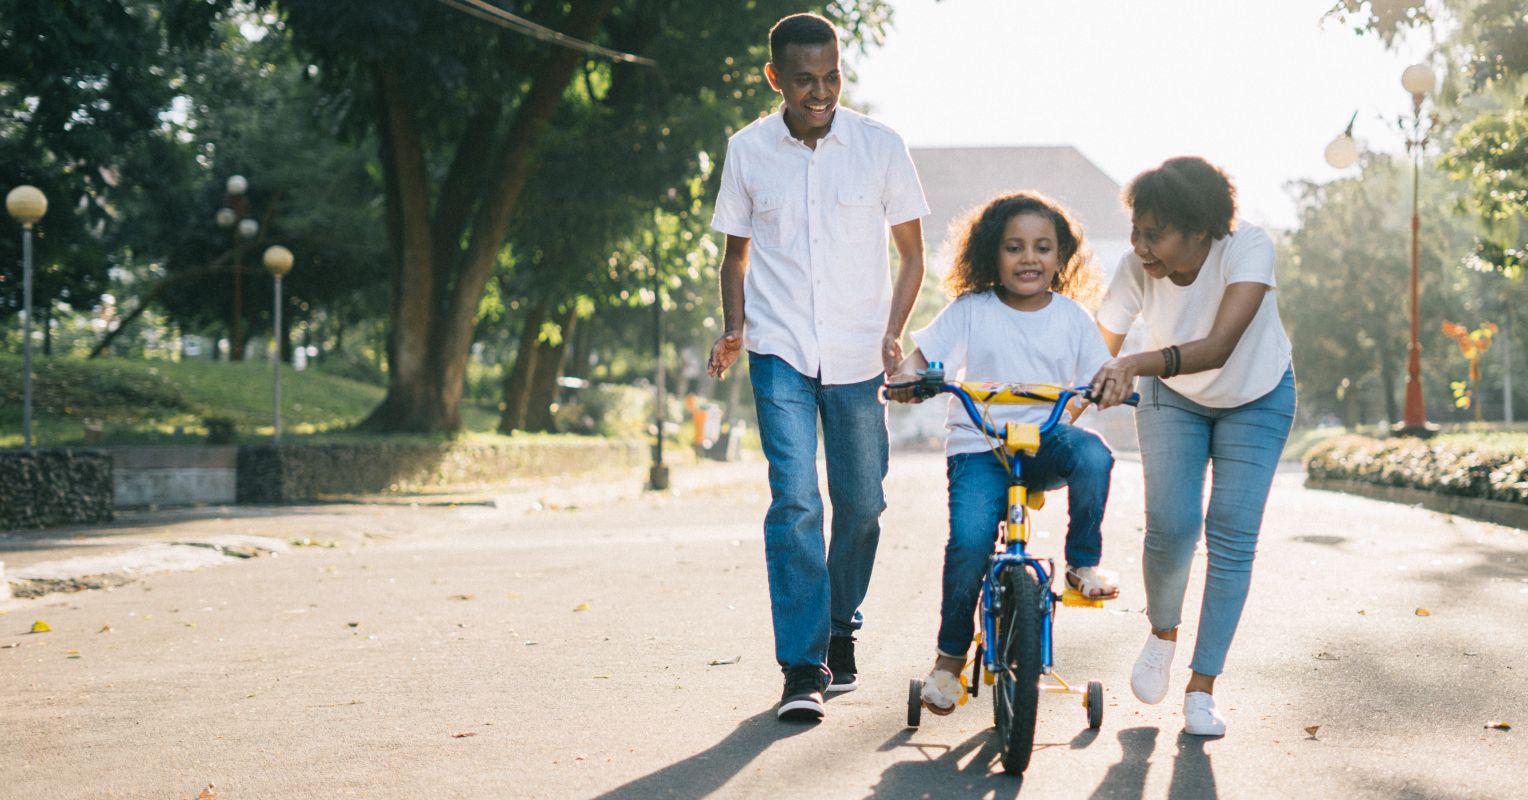 Your Shared Family Personality Can Affect Your Health